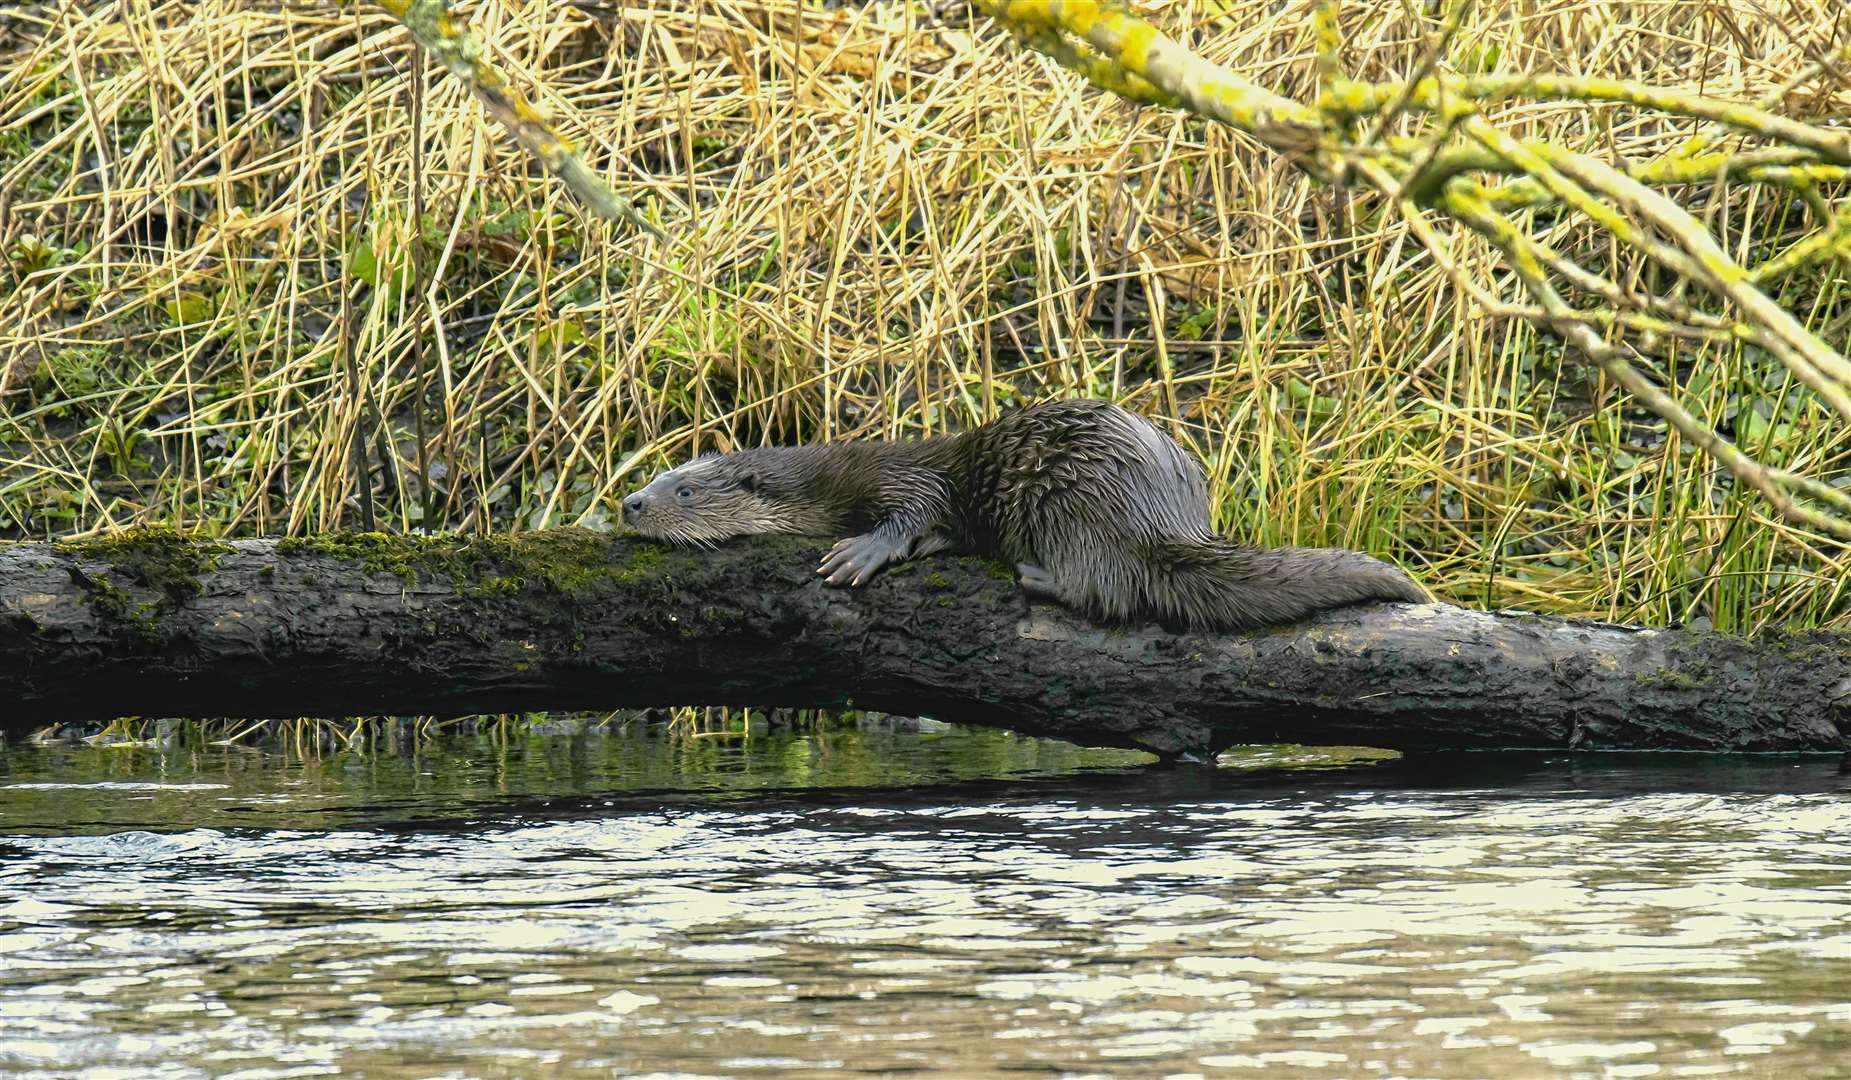 The otter seemed unperturbed by having an audience. Picture: Mel Roger